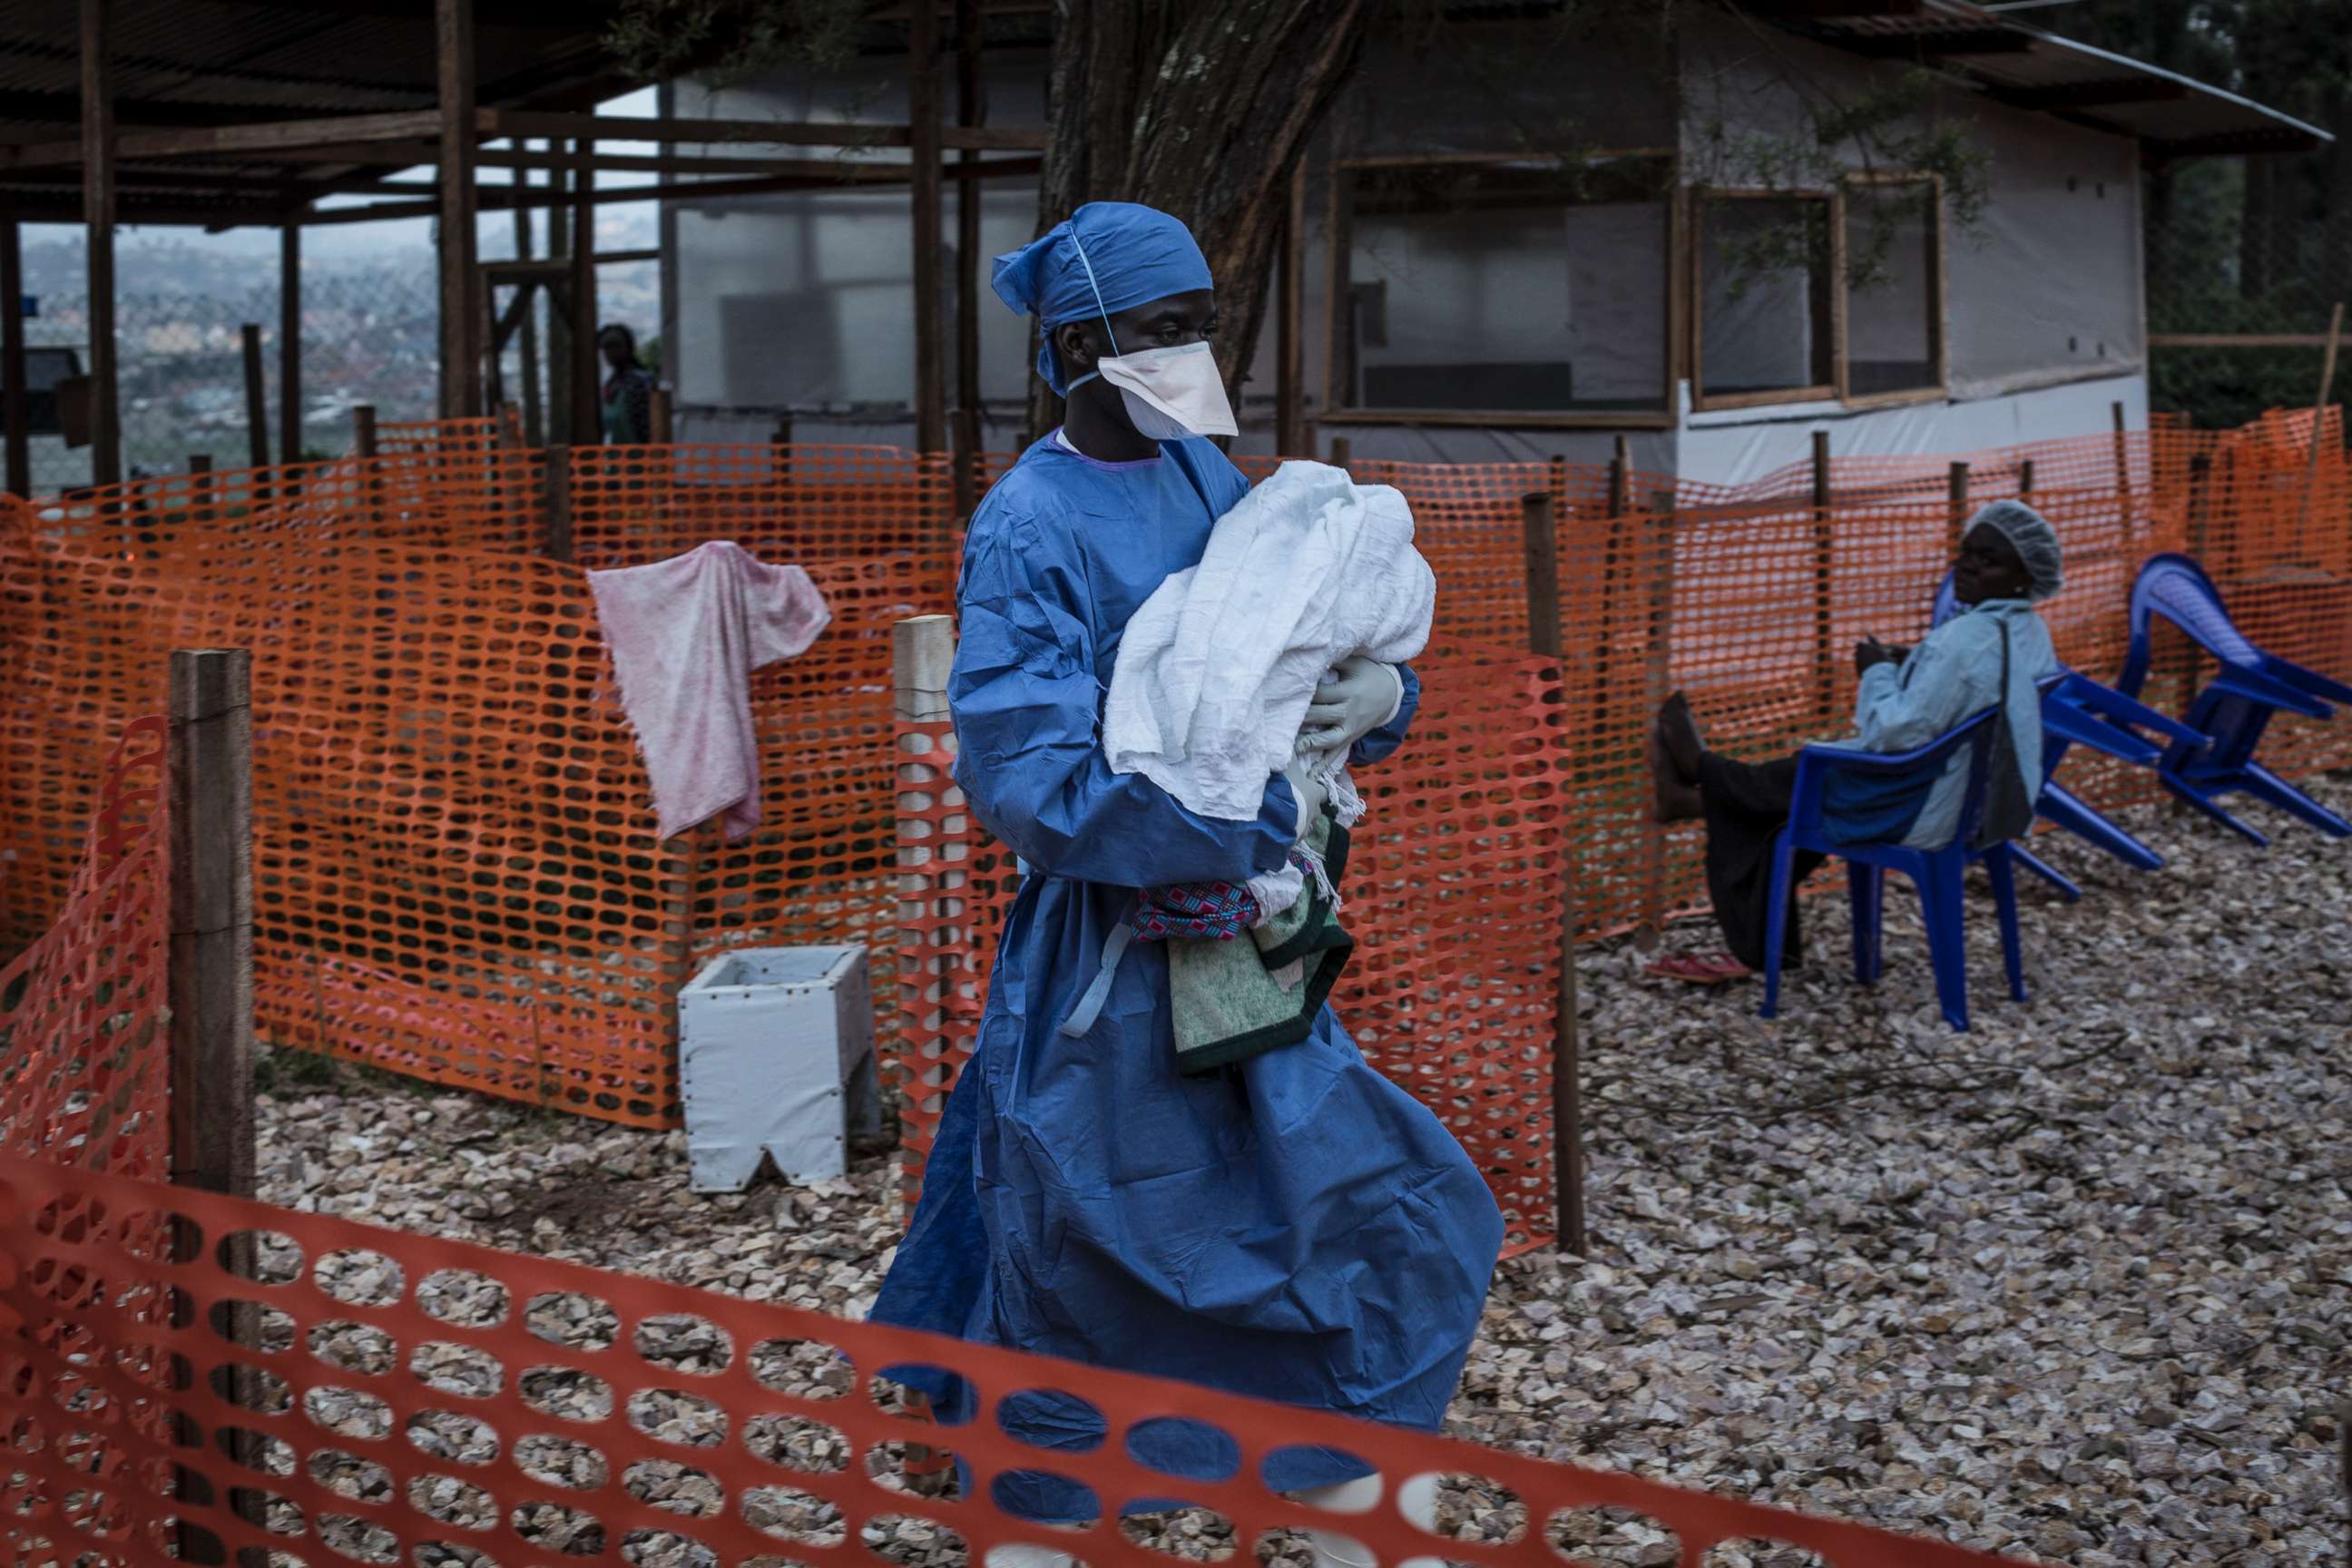 PHOTO: A caretaker already cured of Ebola is seen carrying a four day old baby suspected of having Ebola into a Medecins Sans Frontieres supported Ebola treatment center in Butembo, Congo, Nov. 4, 2018.